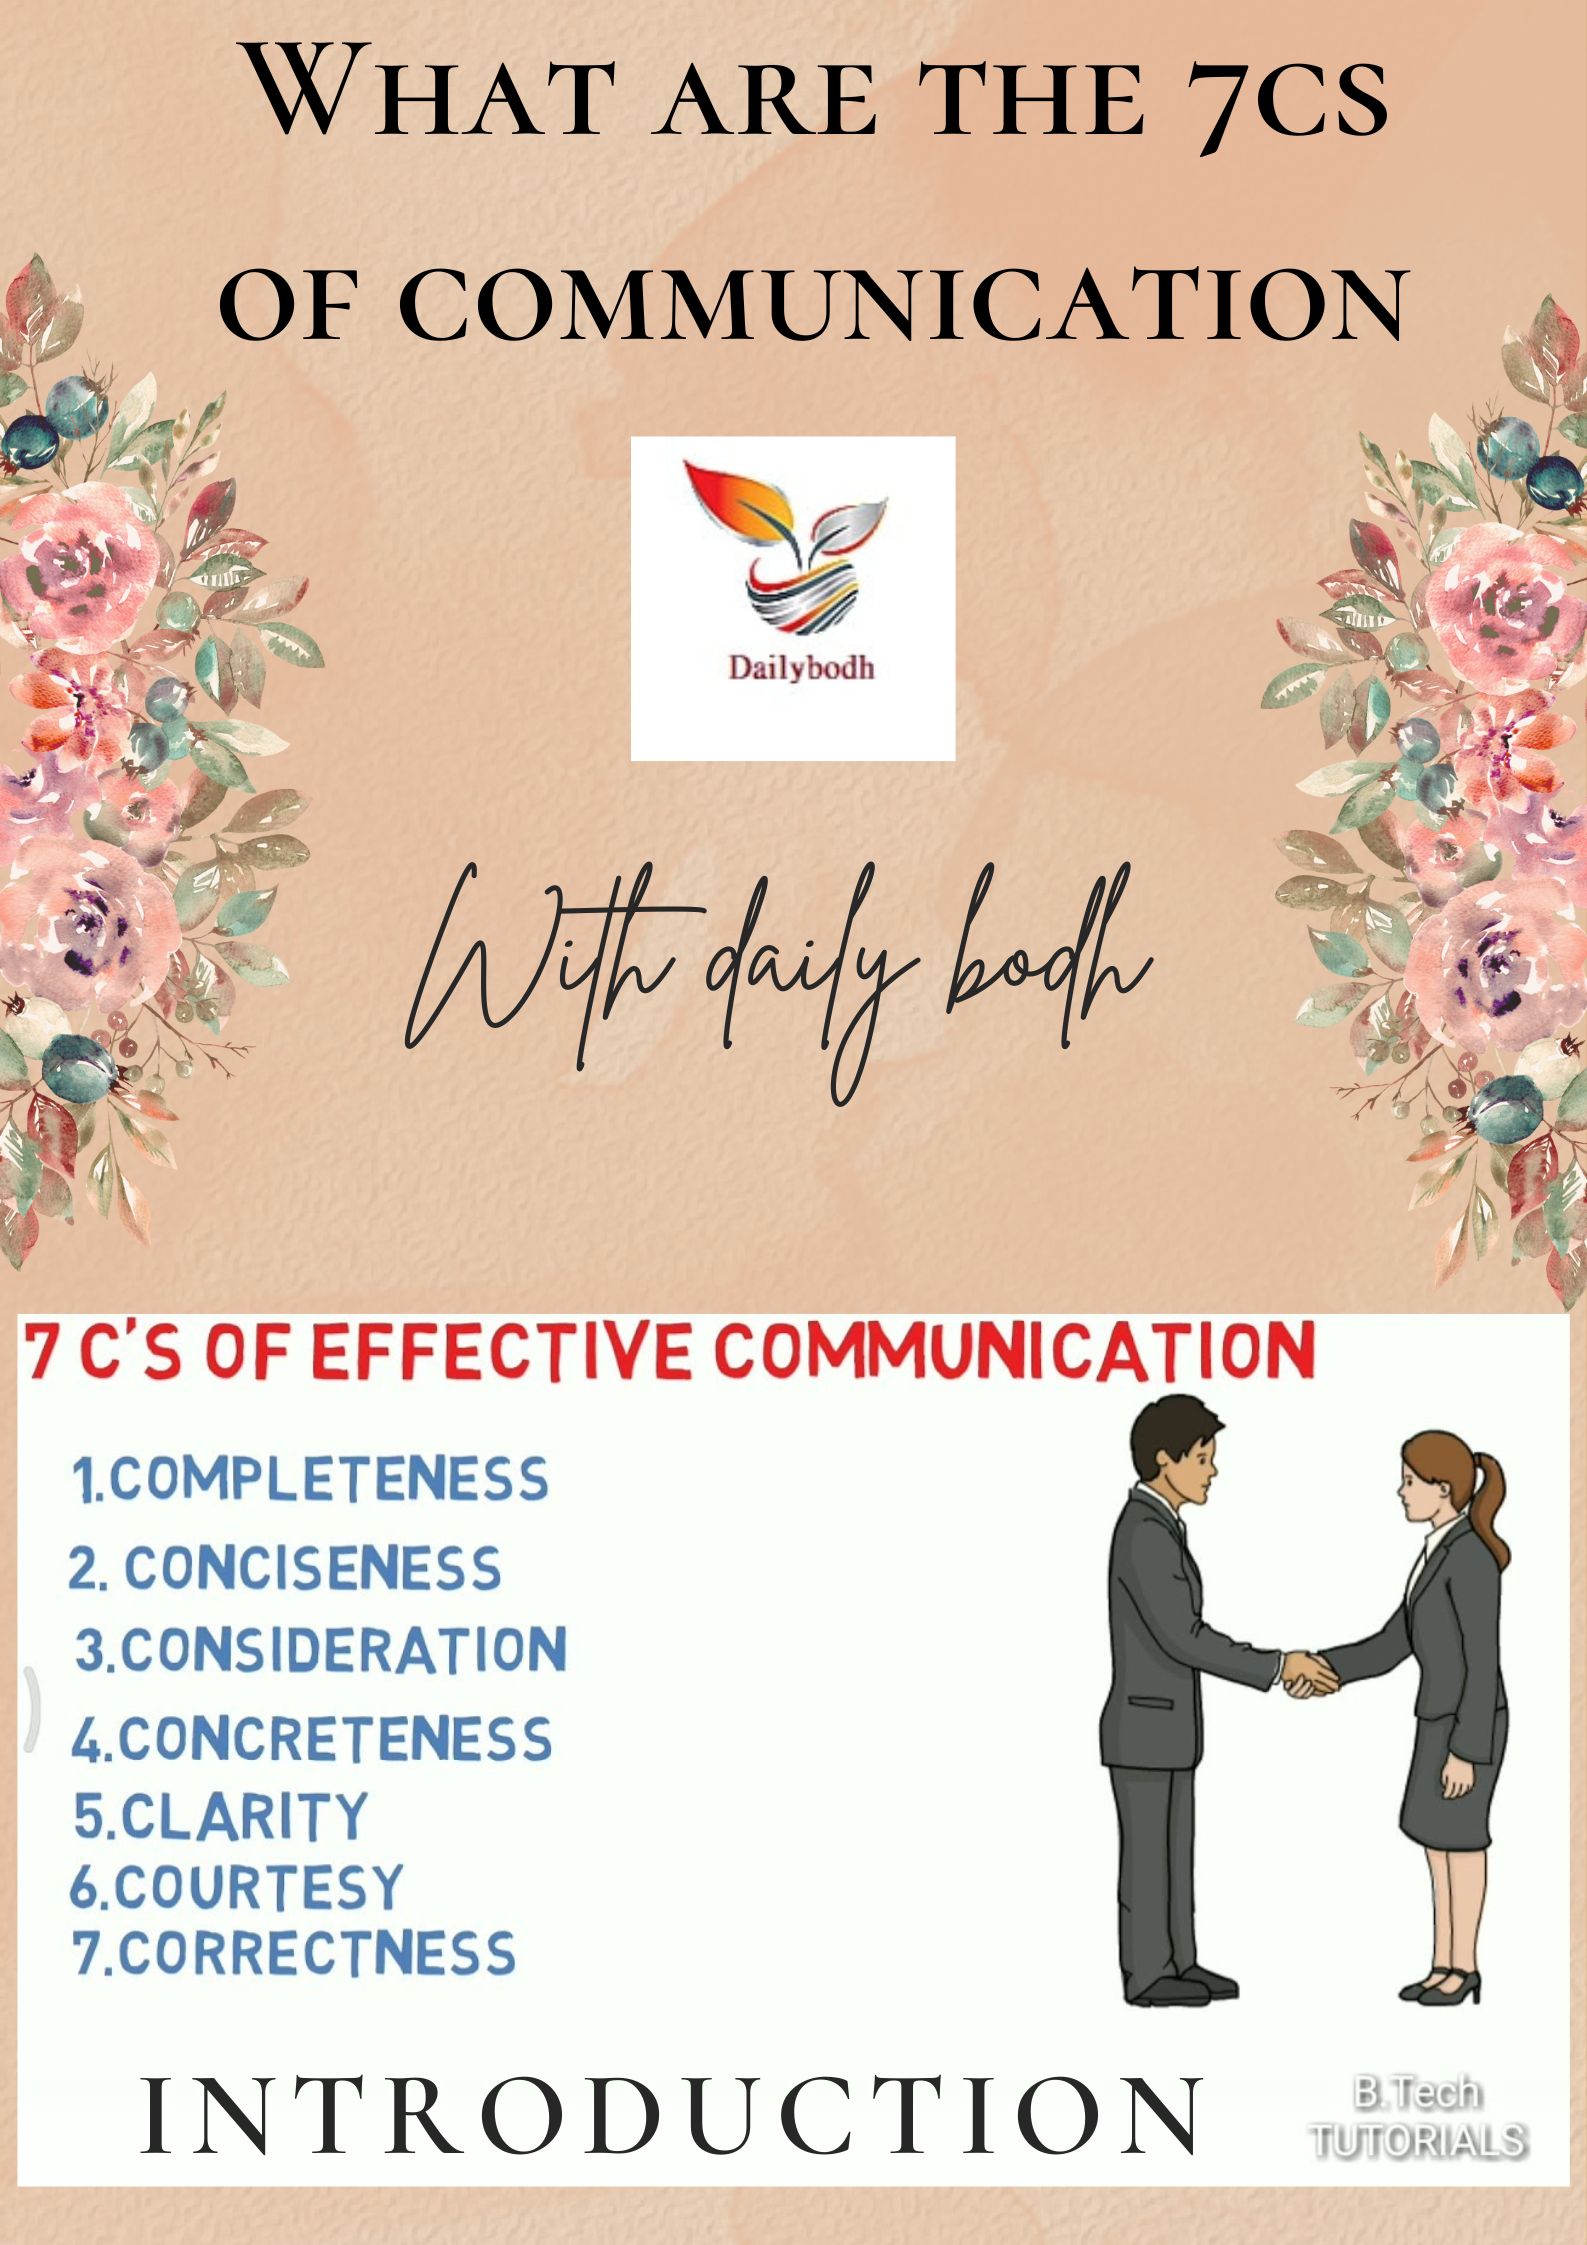 What are the 7cs of communication